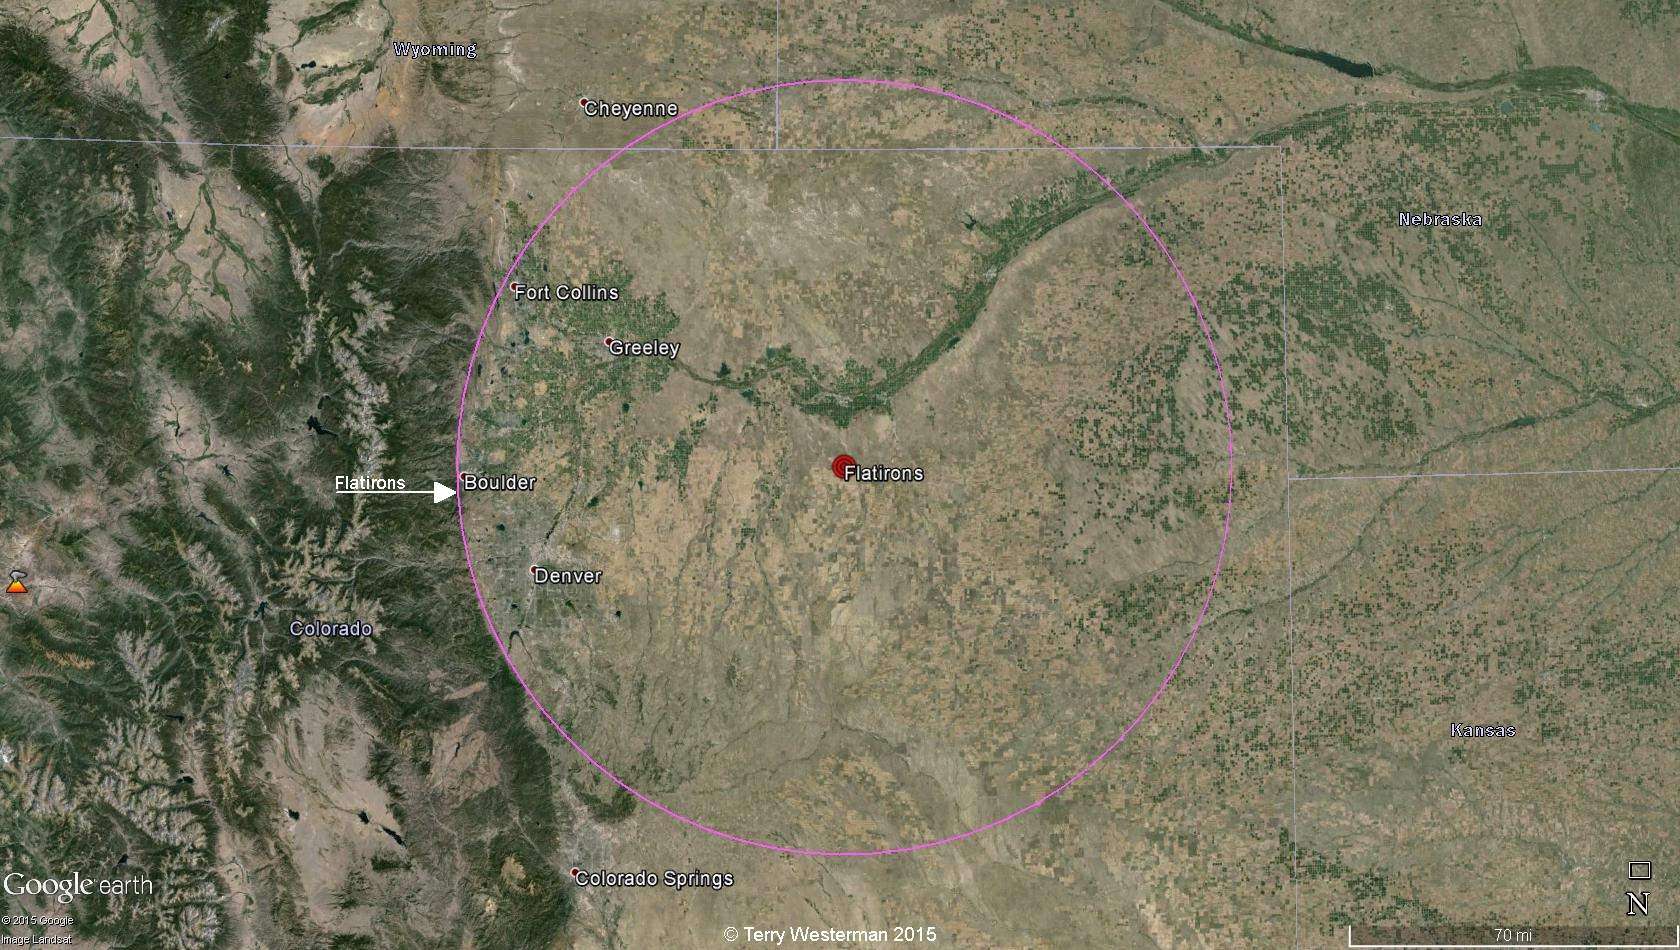 The Flatirons Meteor Impact was centered at  40° 3'6.95"N 103°47'9.53"W. The 80 mile radius seismic circle of the impact formed the circular arc of the Front Range in Colorado.